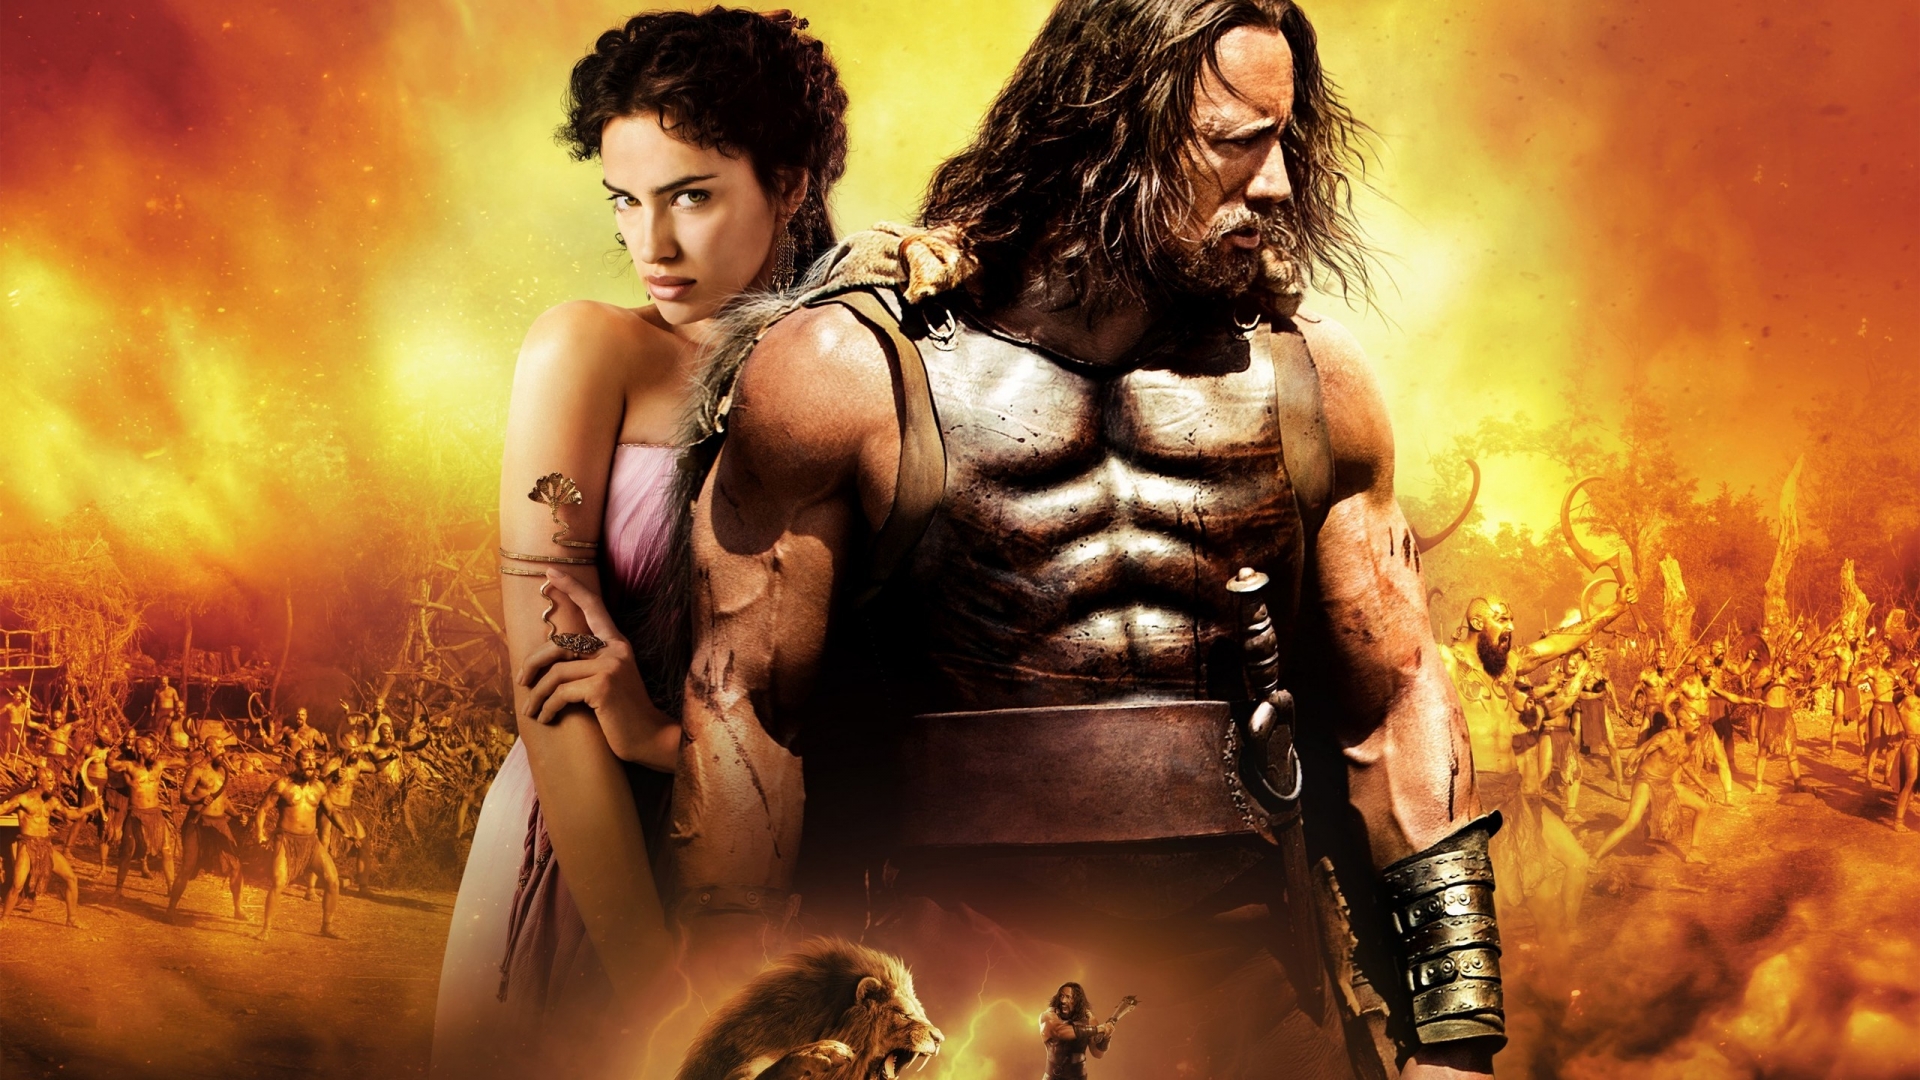 Hercules 2014 Movie Poster for 1920 x 1080 HDTV 1080p resolution